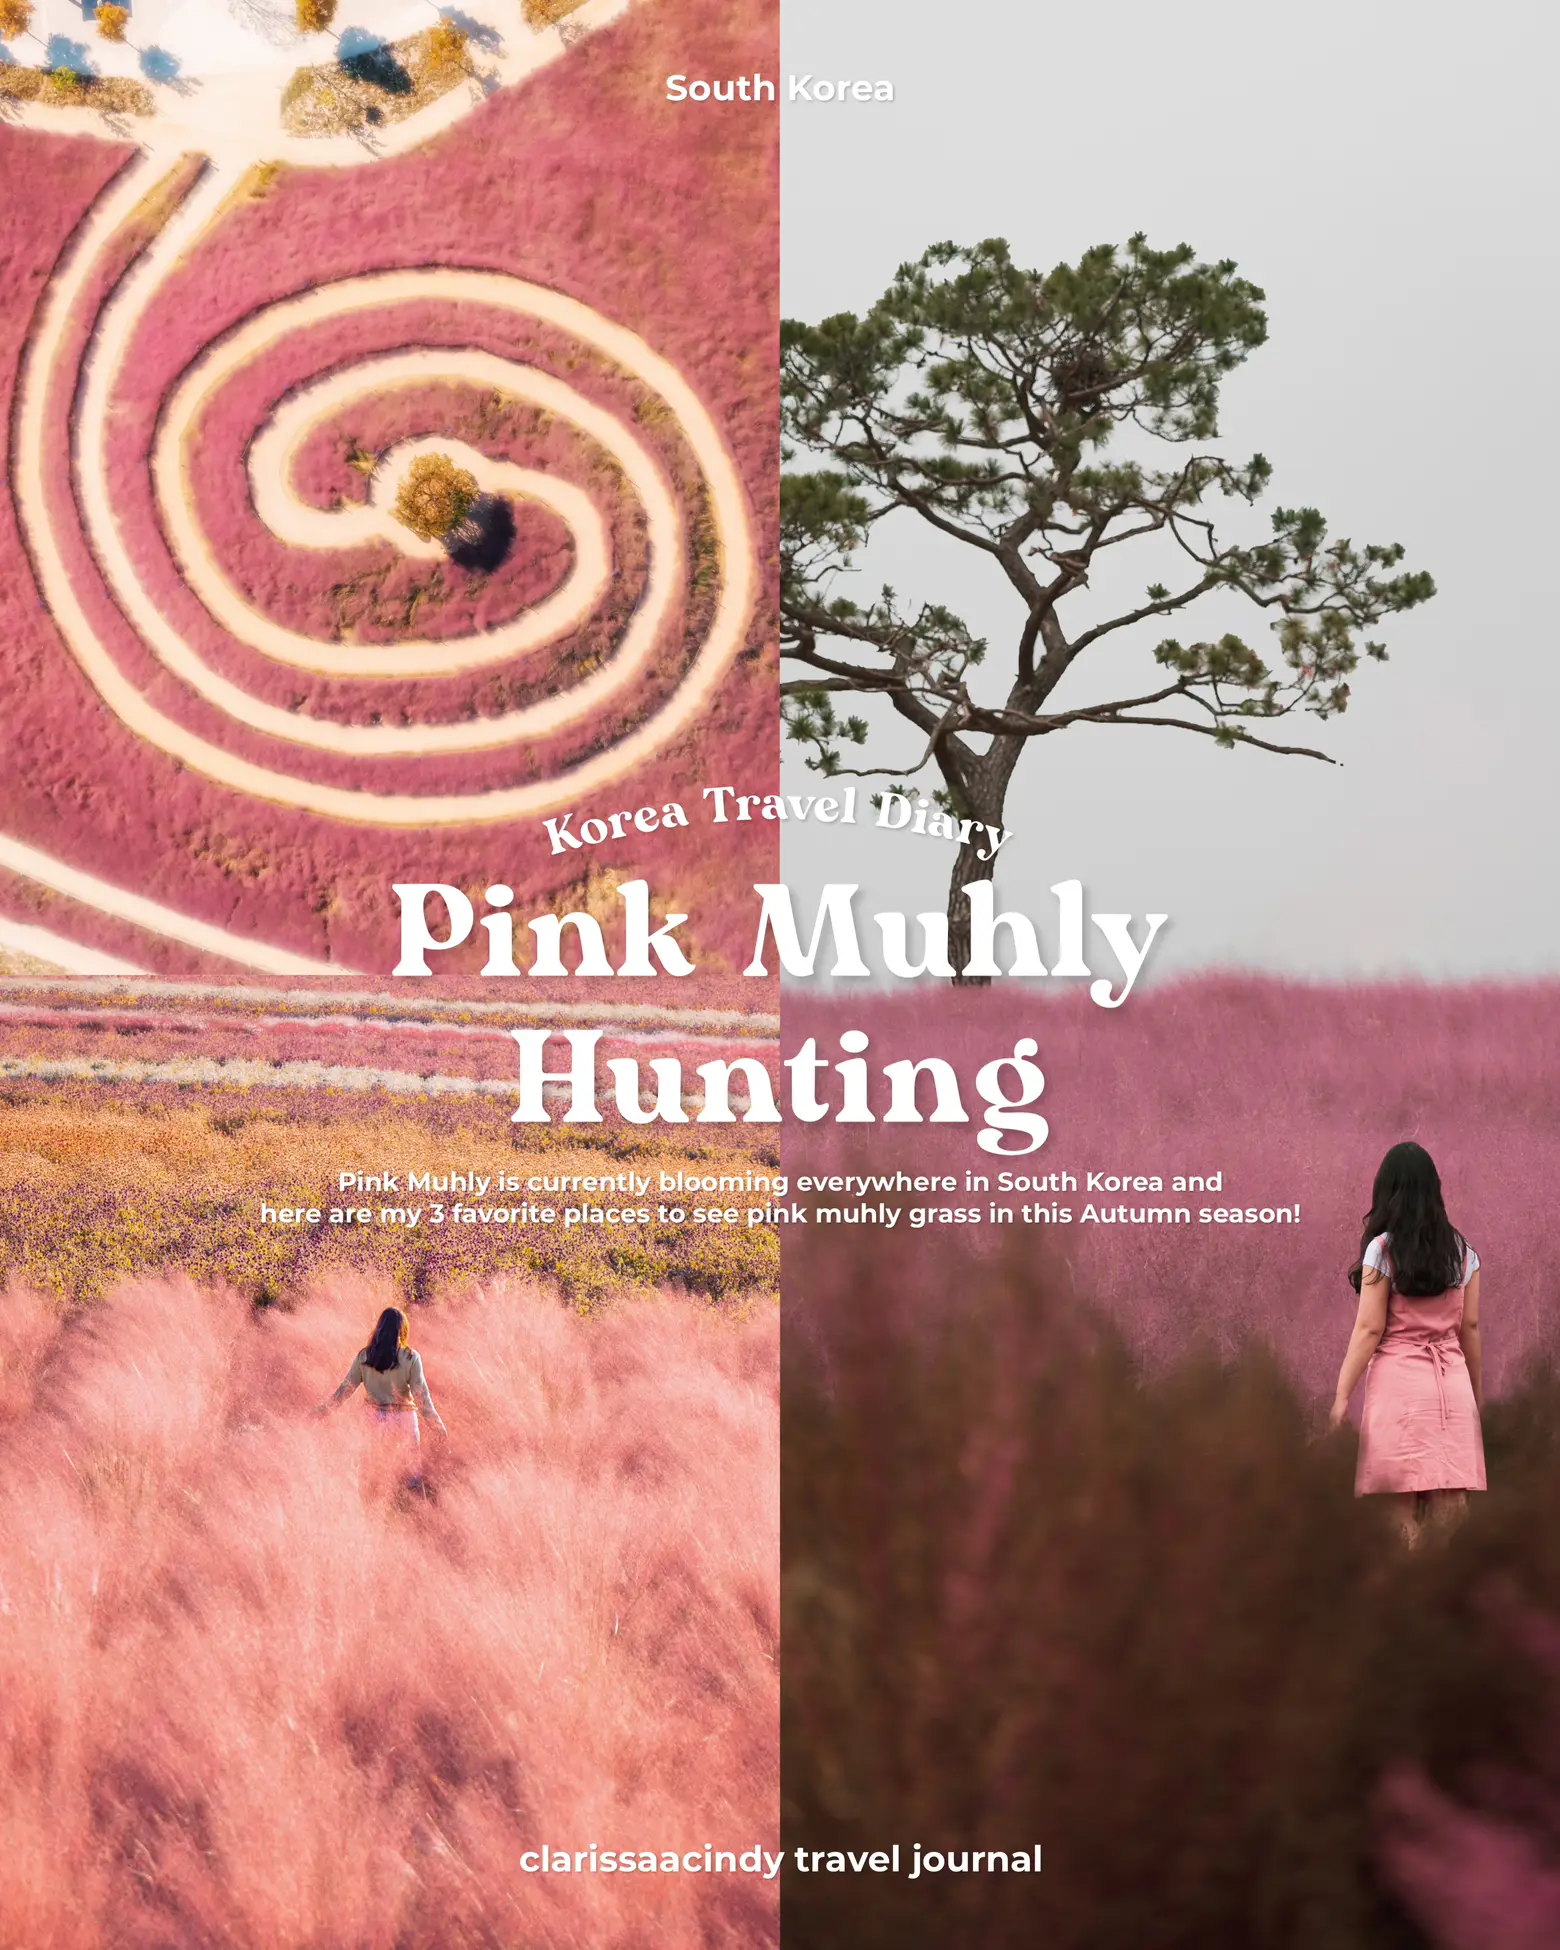 🌾 My 3 top places to see Pink Muhly in Korea